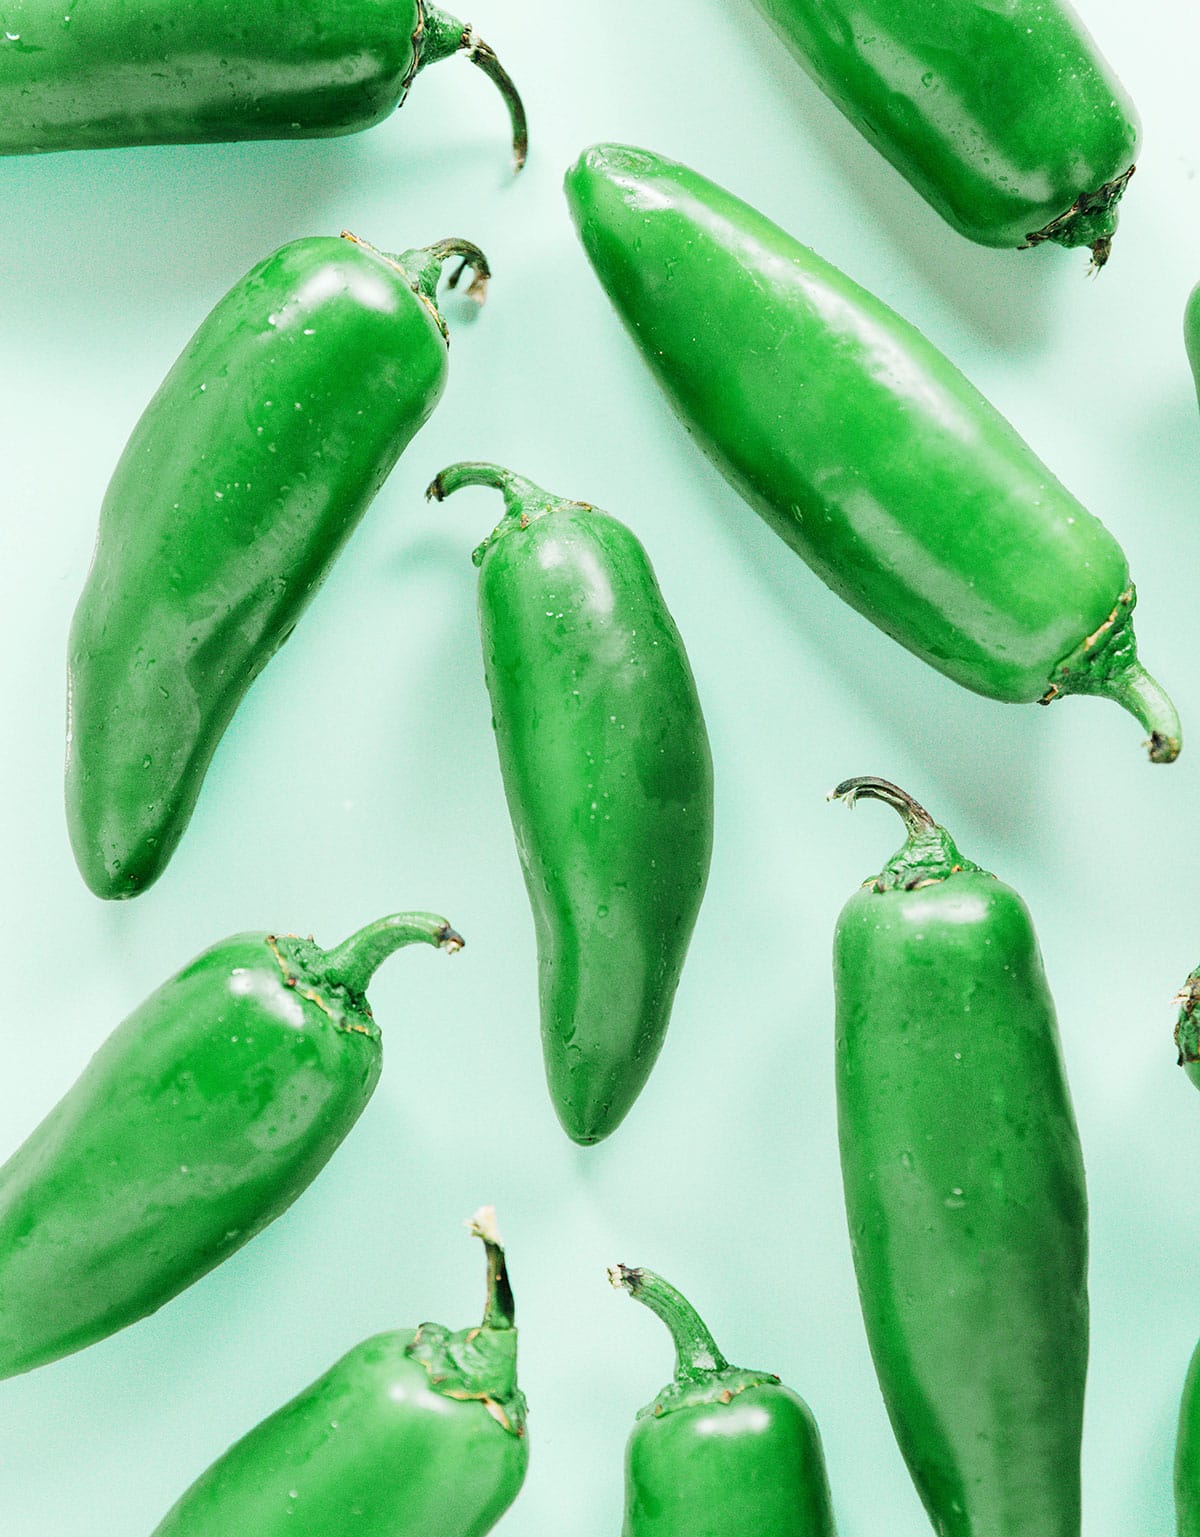 Fresh jalapeño peppers on a turquoise surface.